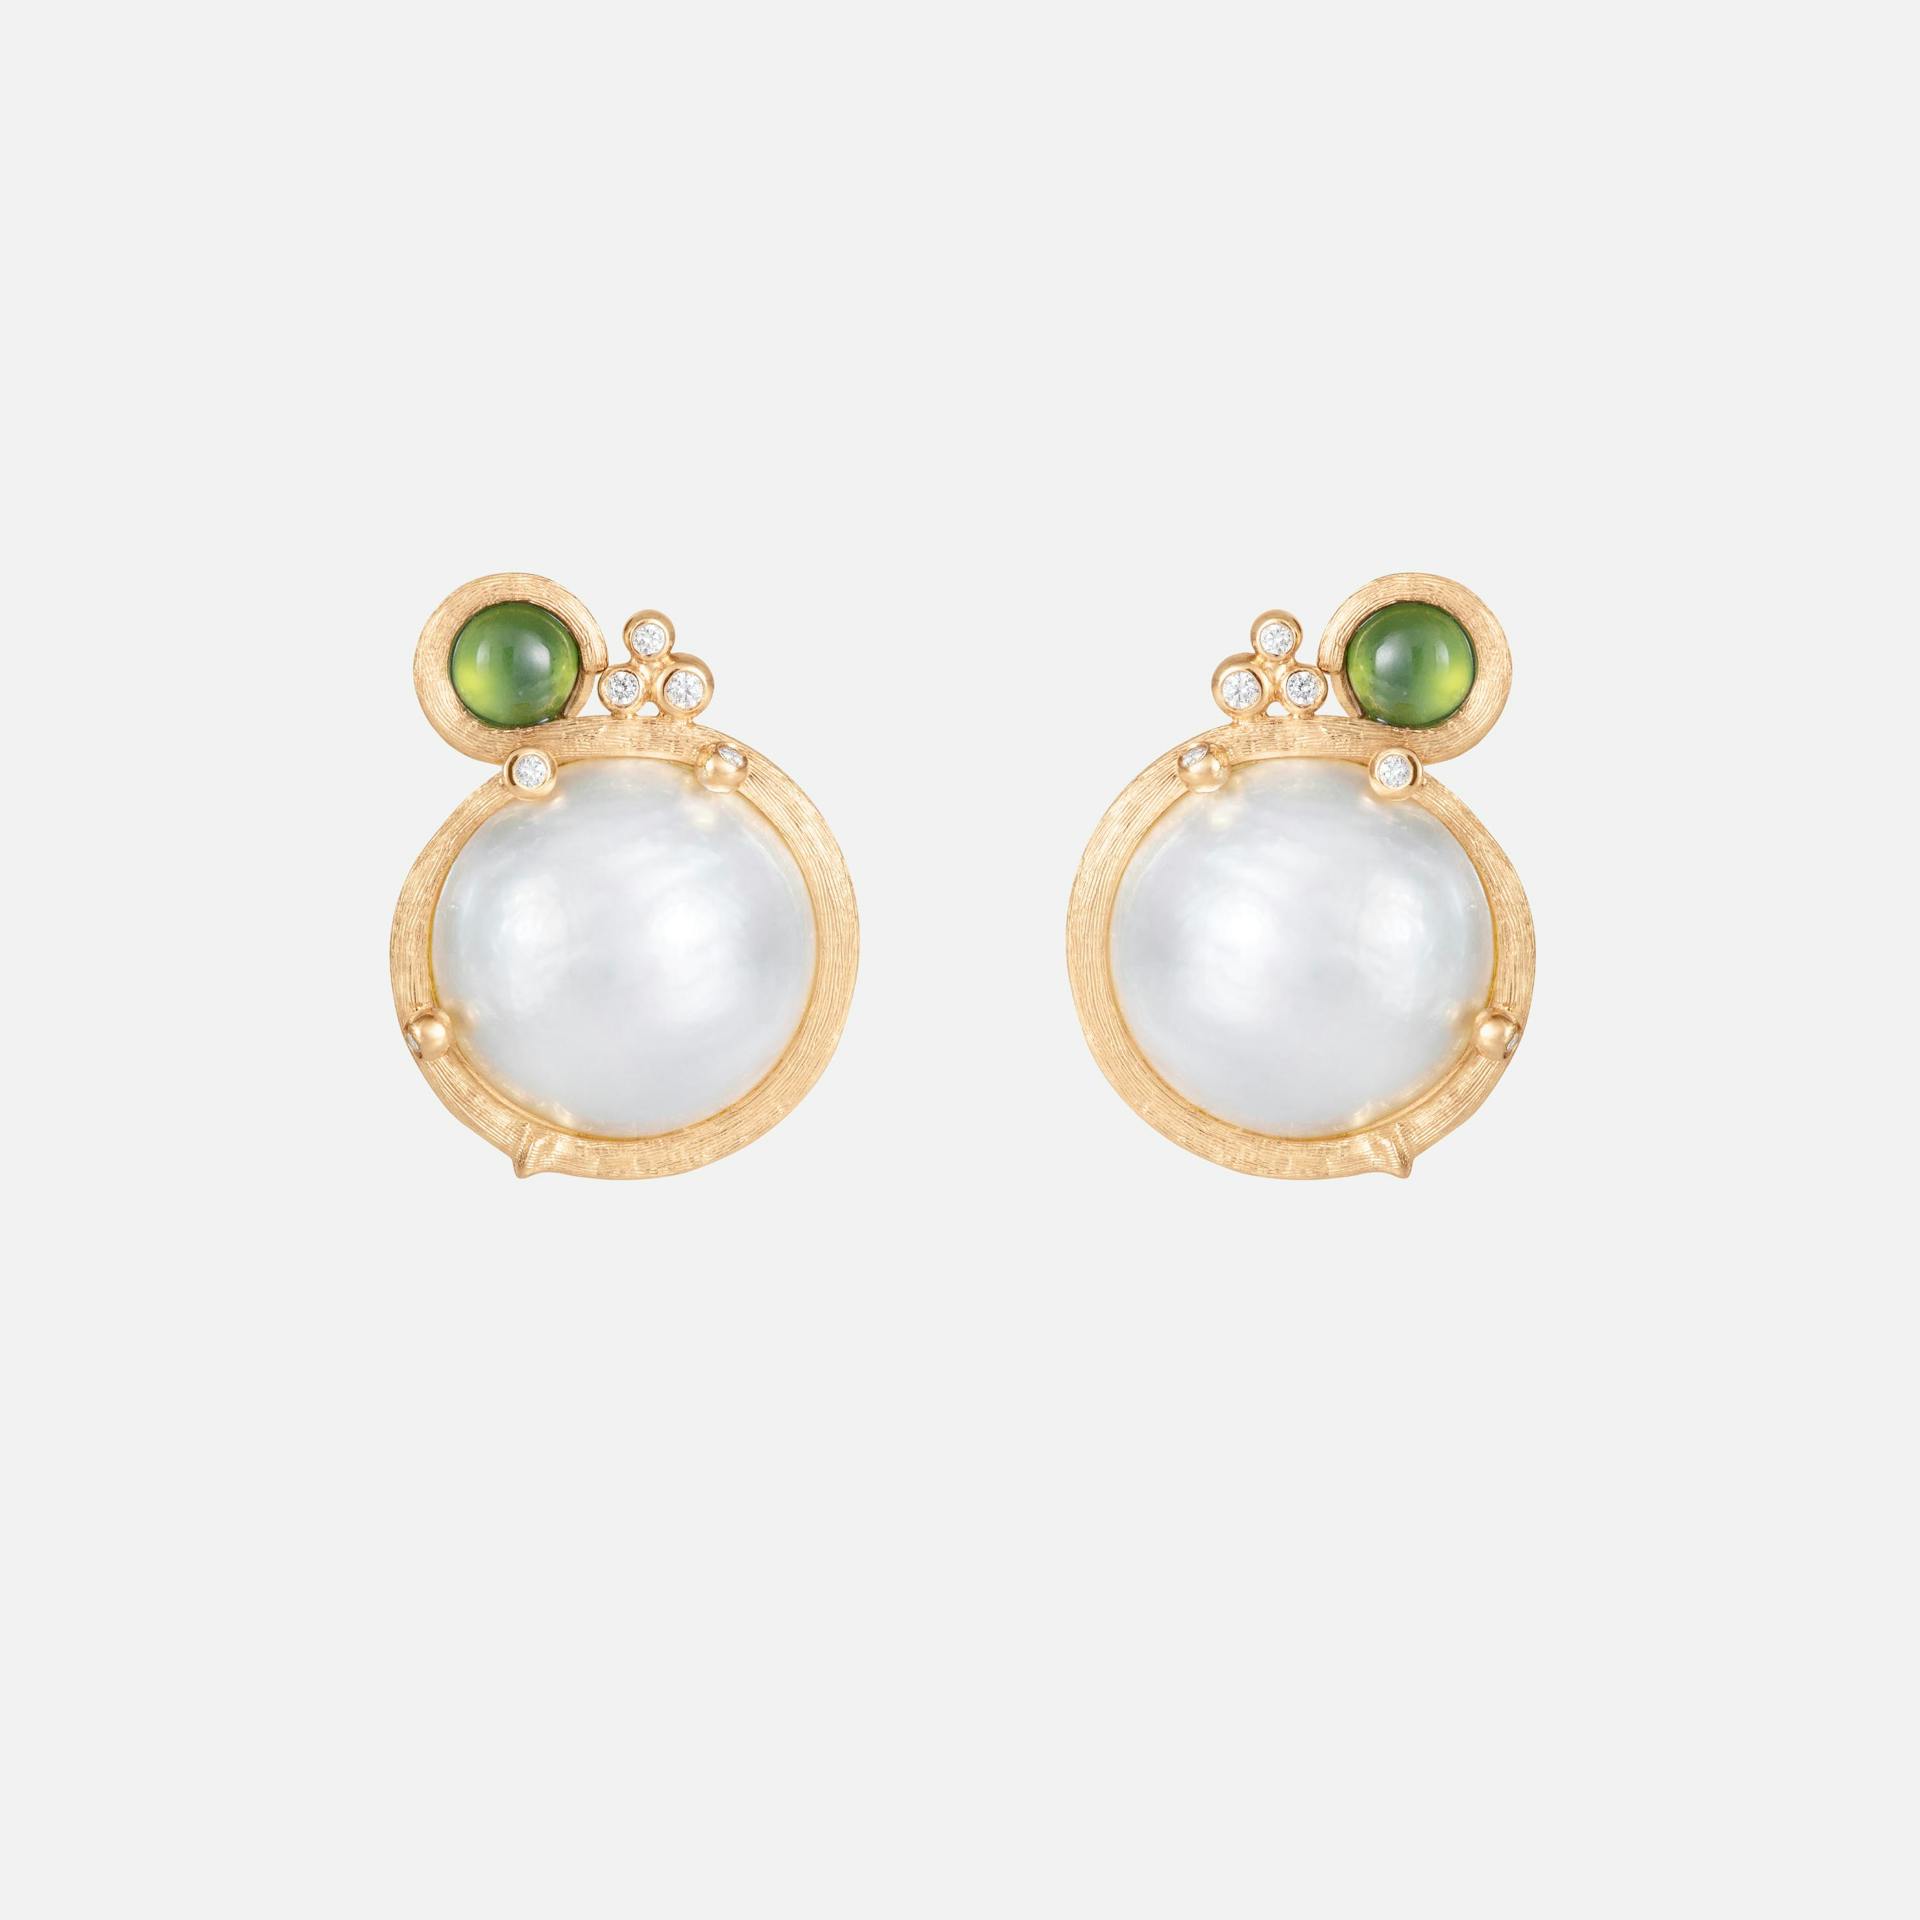 BoHo earclips small 18k gold with Mabe pearls, green tourmaline and diamonds